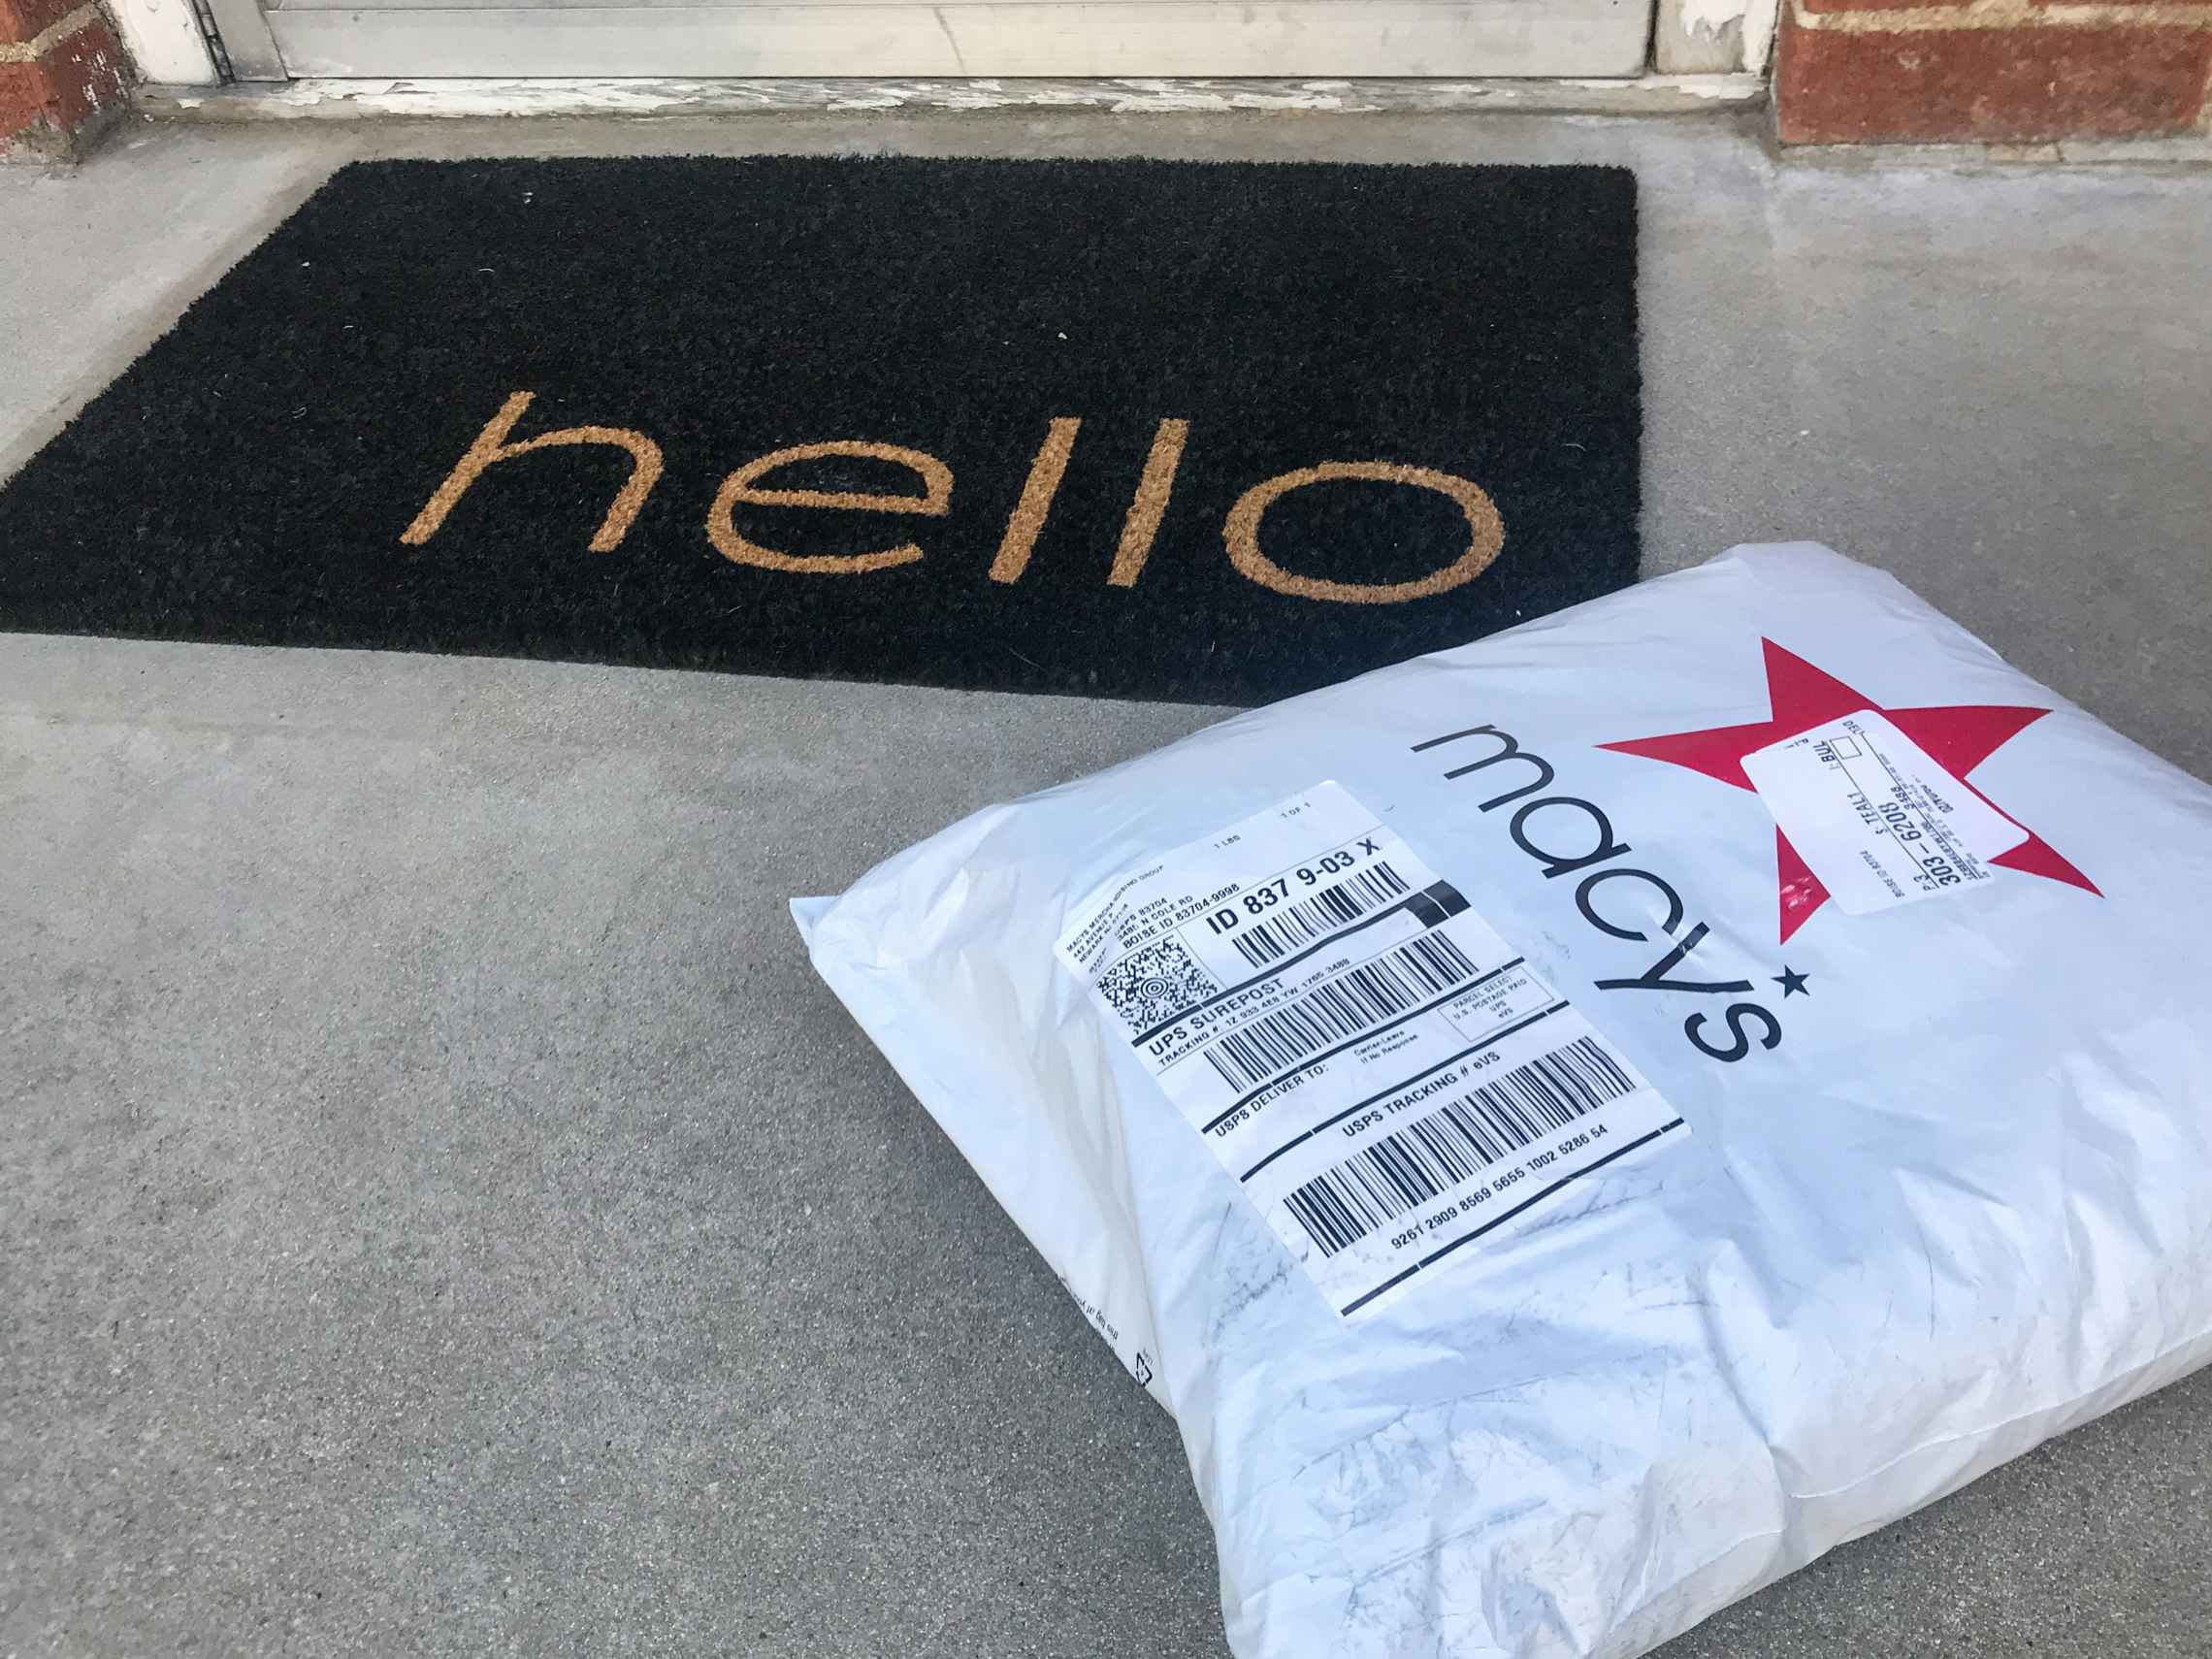 A Macys.com online order package on a doorstep next to a doormat that says "Hello".